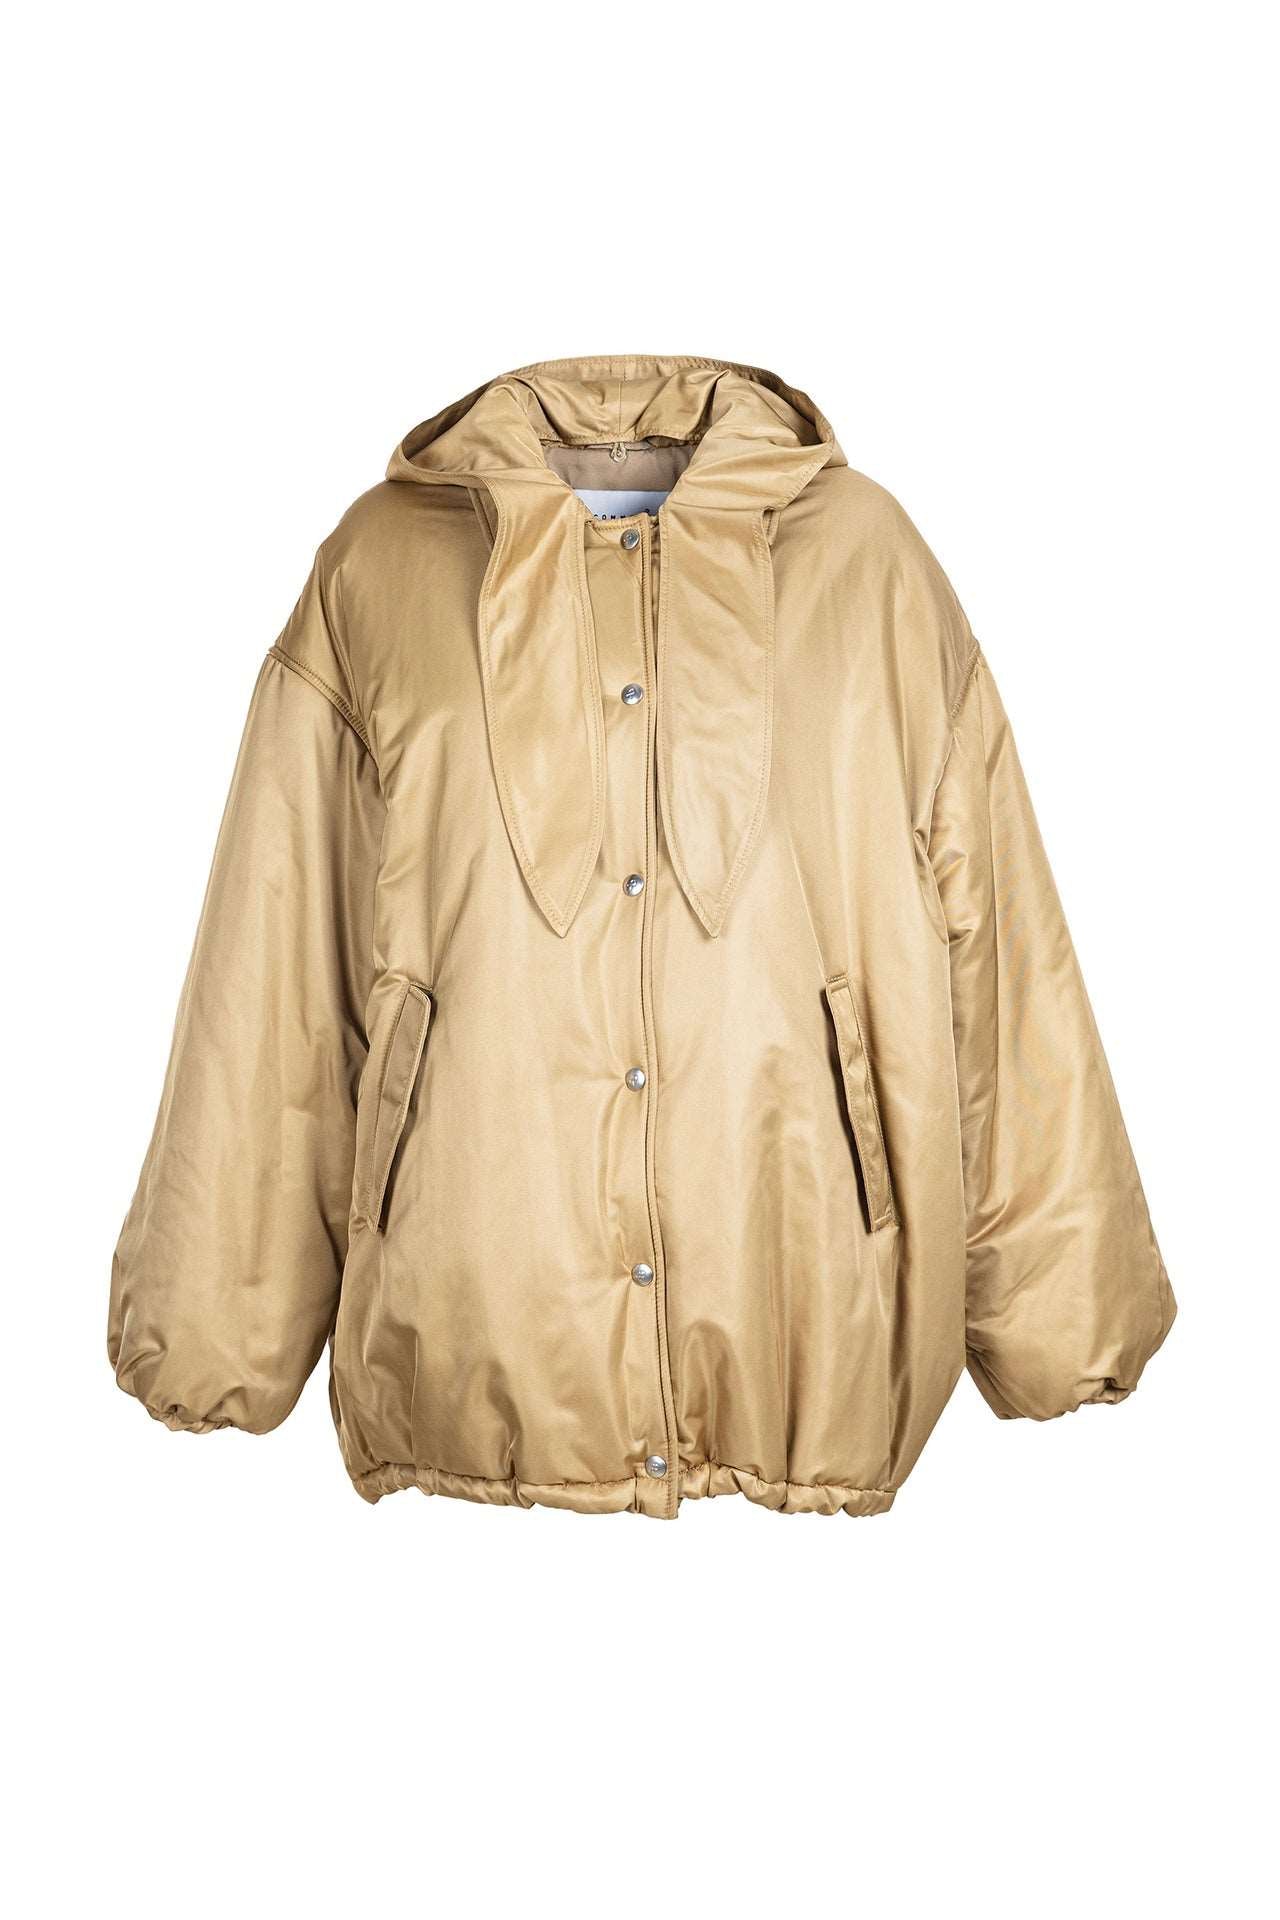 THE SUN PADDED CANVAS JACKET - GOLD